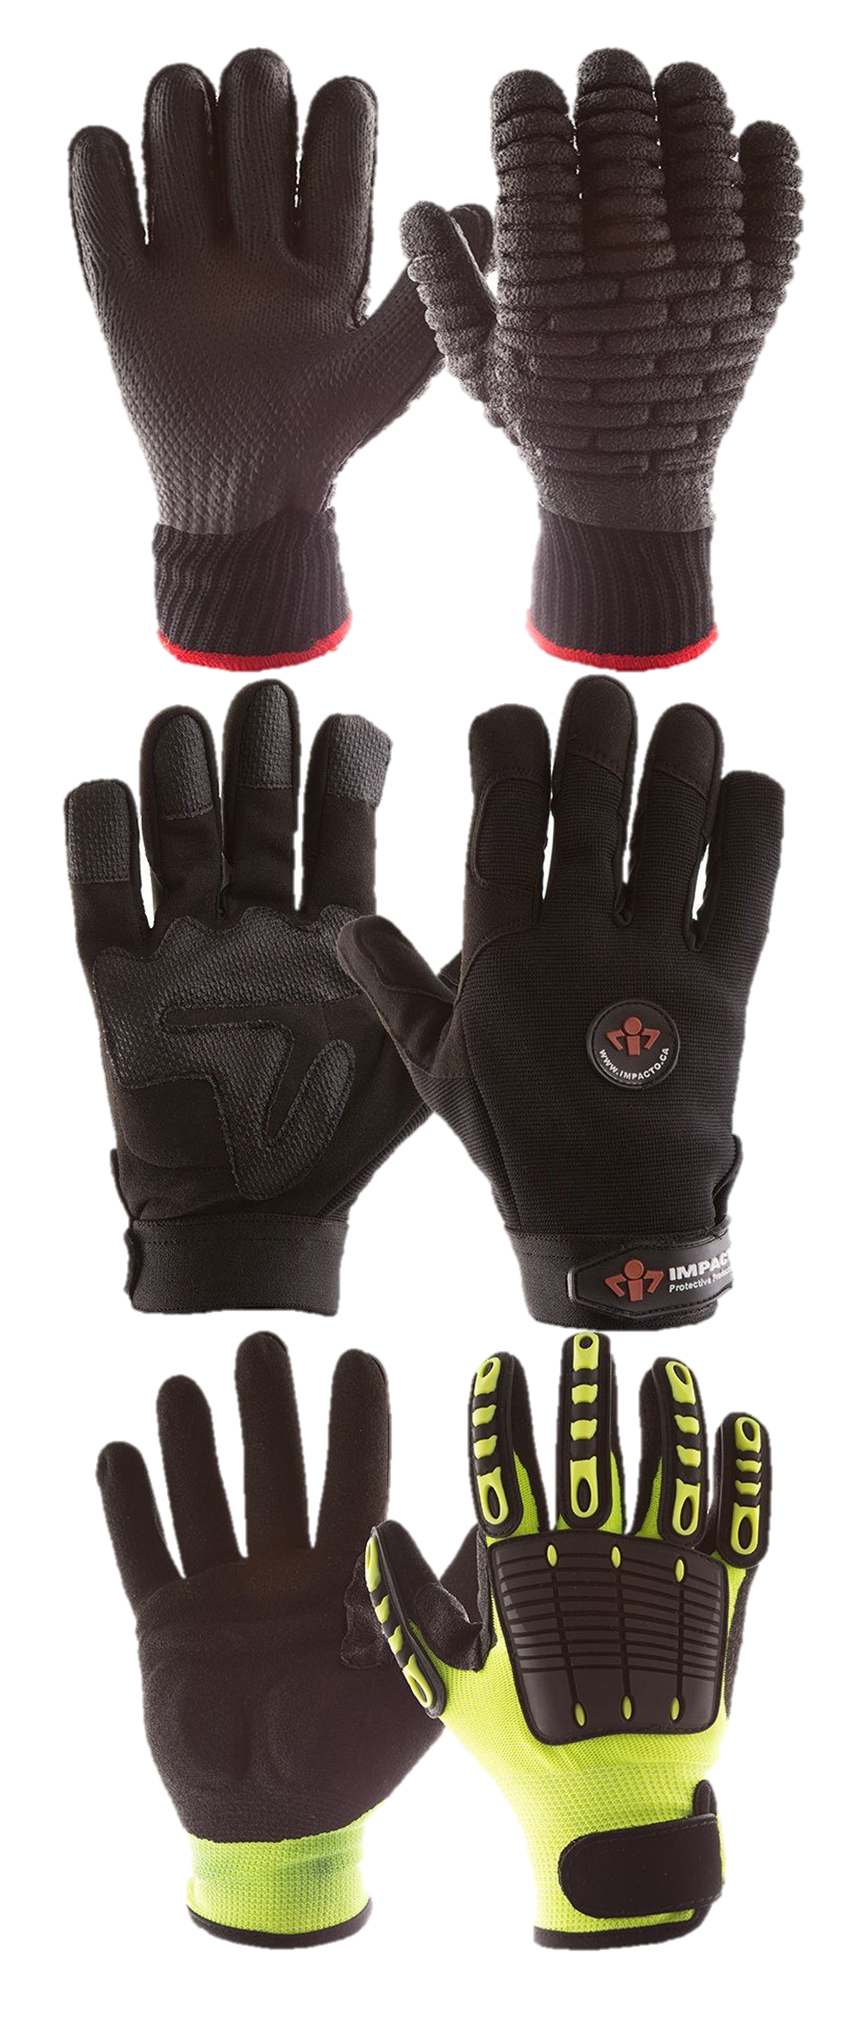 IMPACTO Specialized Anti-Impact Hand Protection